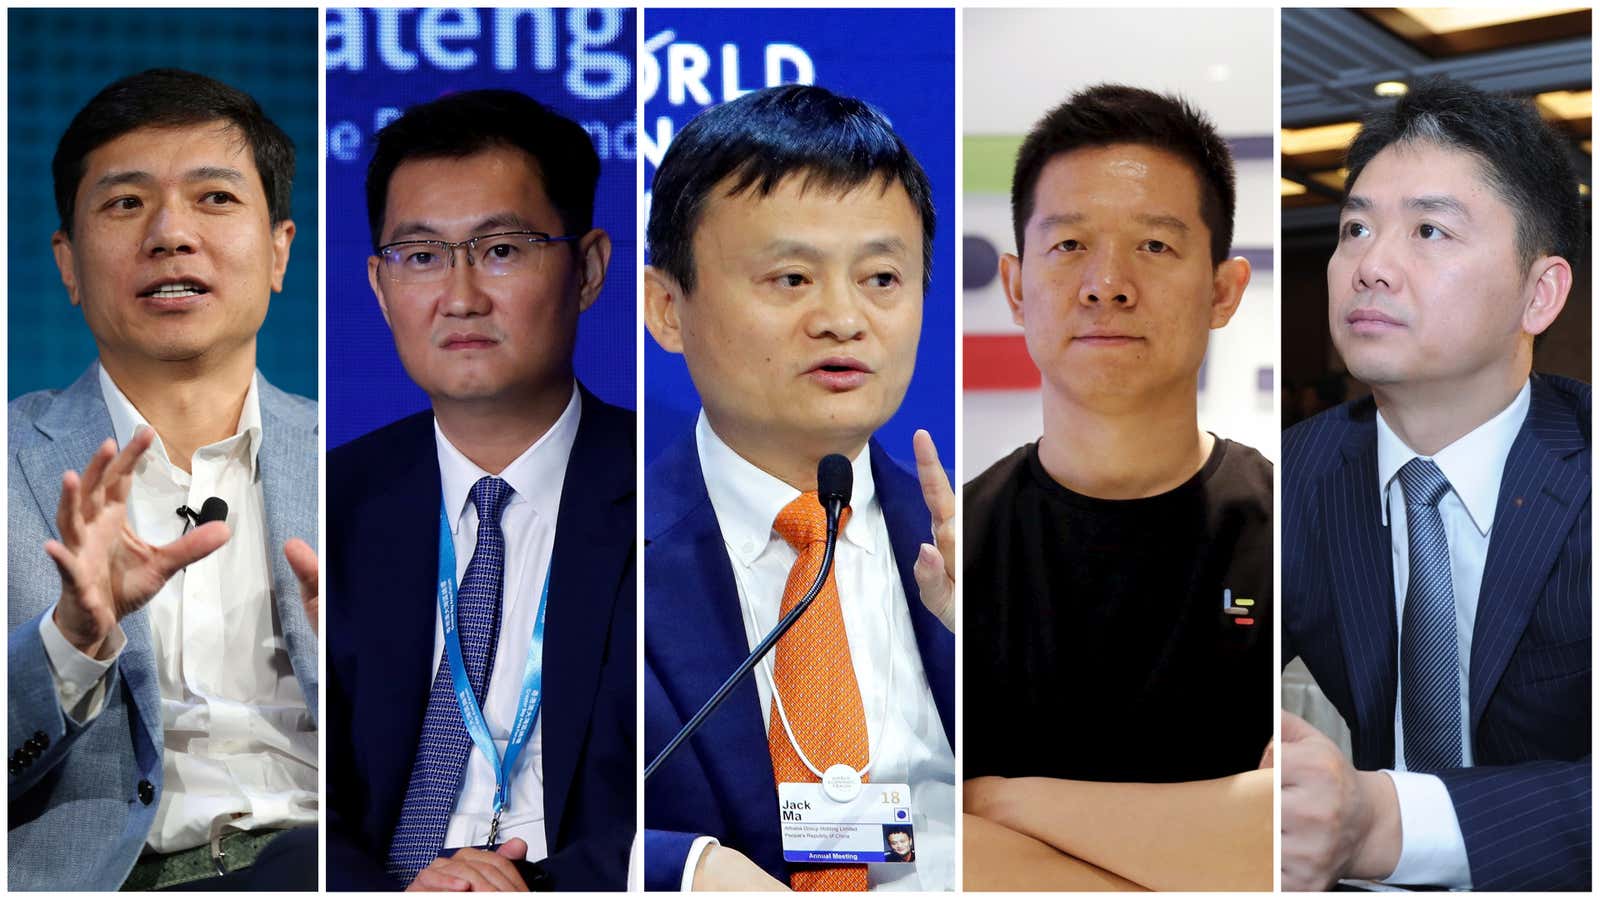 The ones who are ridiculed by China’s internet users.